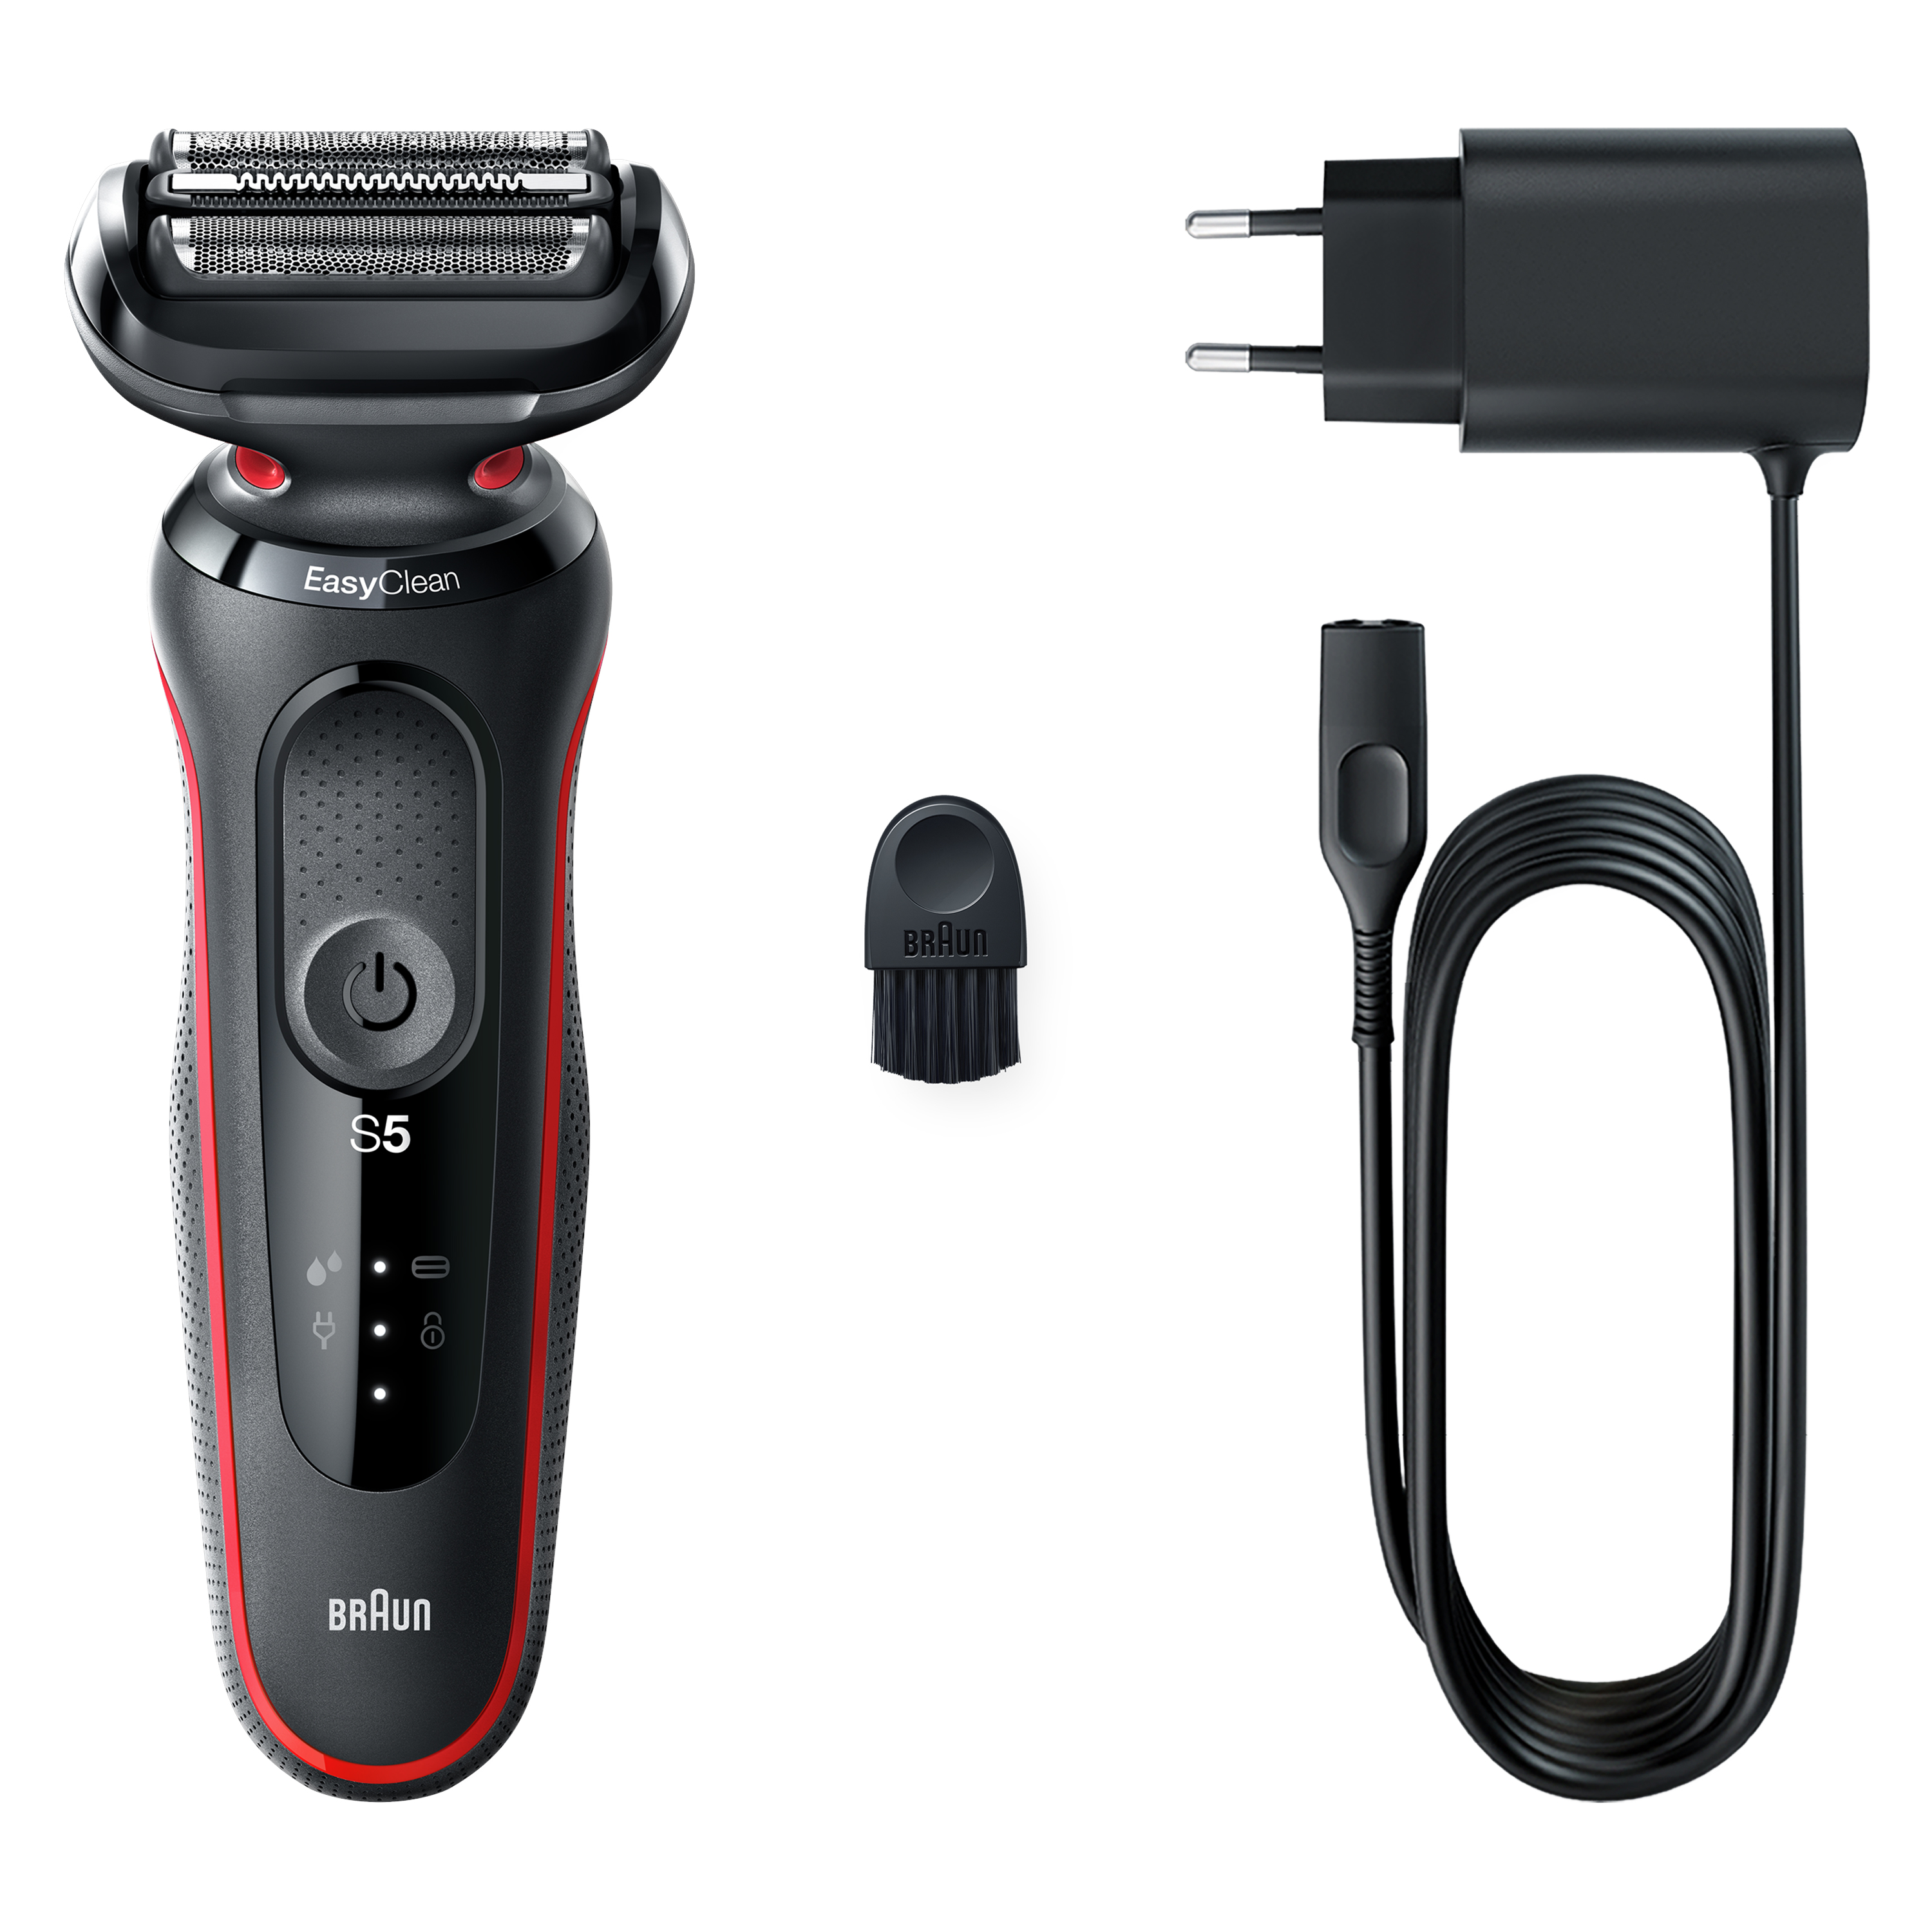 Wet & Series shaver, 51-R1000s Dry 5